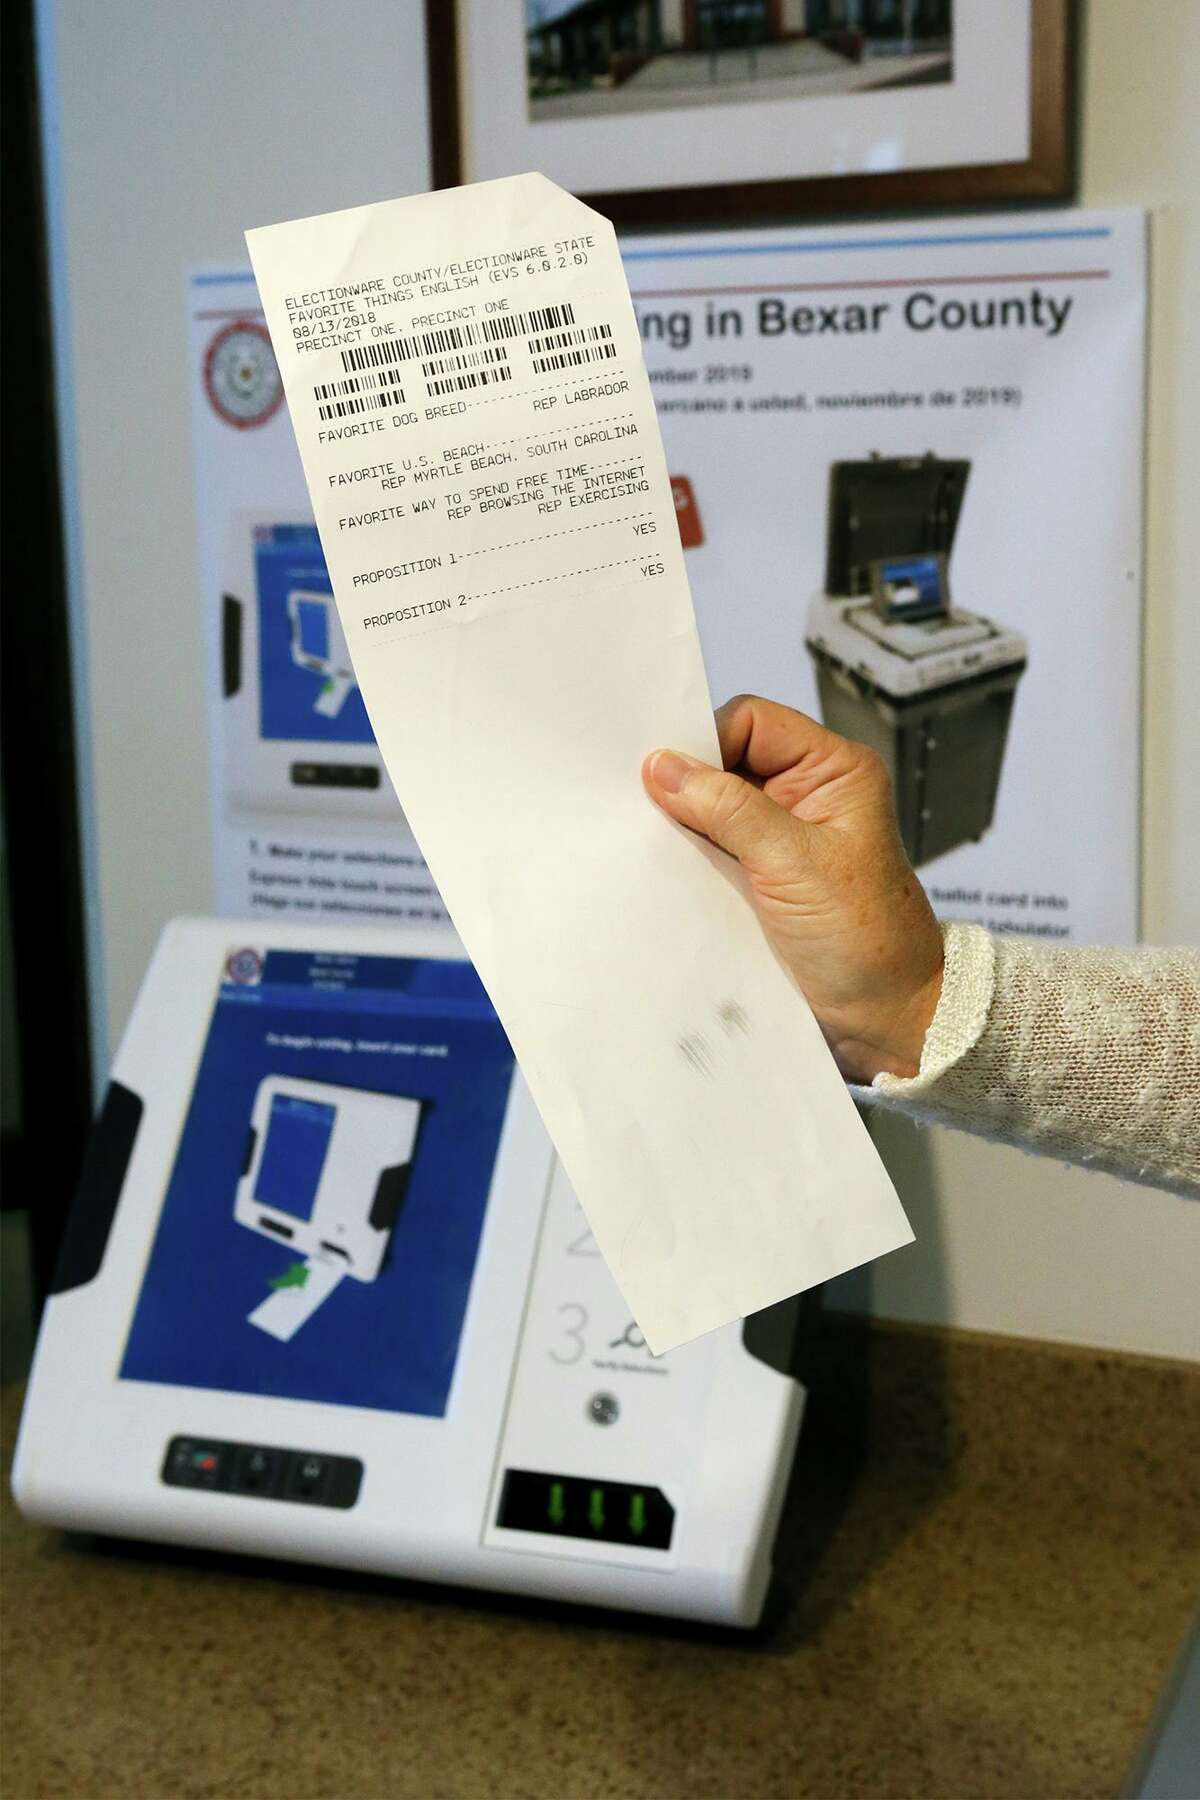 A sample printed ballot produced by the new ExpressVote ballot box in the background that will be used in Bexar County Elections as explained by Bexar County Elections Administrator Jacque Callanen at the Elections Department offices, 1103 S. Frio St., on Tuesday, Nov. 4, 2019. Votes will be input on screen and printed on this card, to be verified by the voter. The card will then be put into a tabulator where the votes will be recorded. Bexar County will use 2500 of the new machines at 264 polling sites countrywide and for the first time, voter can cast ballots anywhere in Bexar County on Election Day.